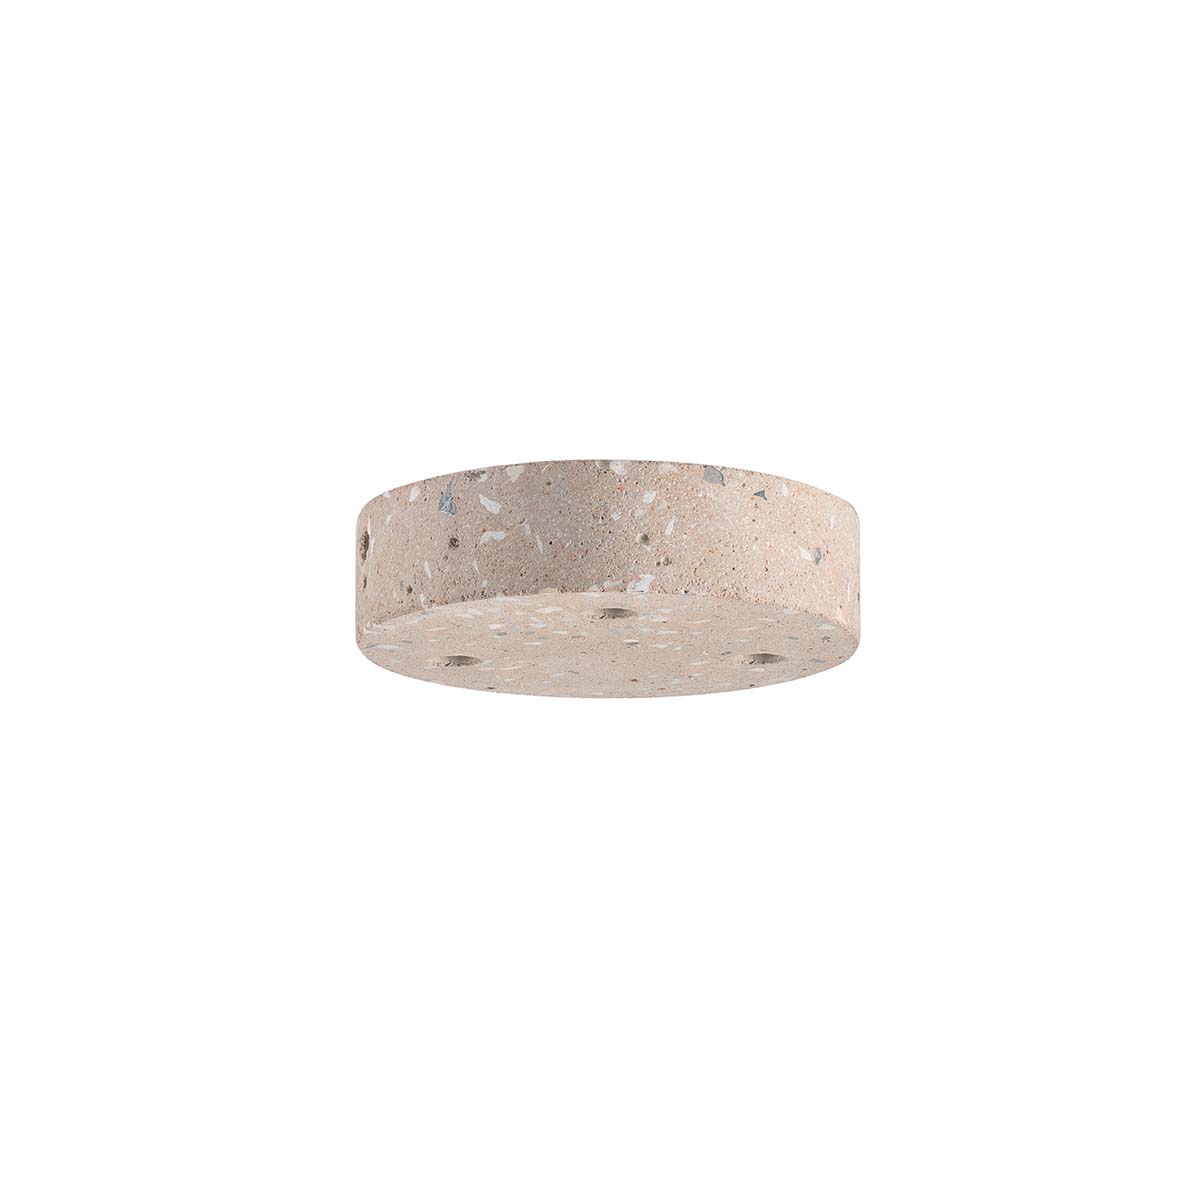 Tangla lighting - TLCP025-03CR - Water stone 3 Lights round canopy stage - concrete